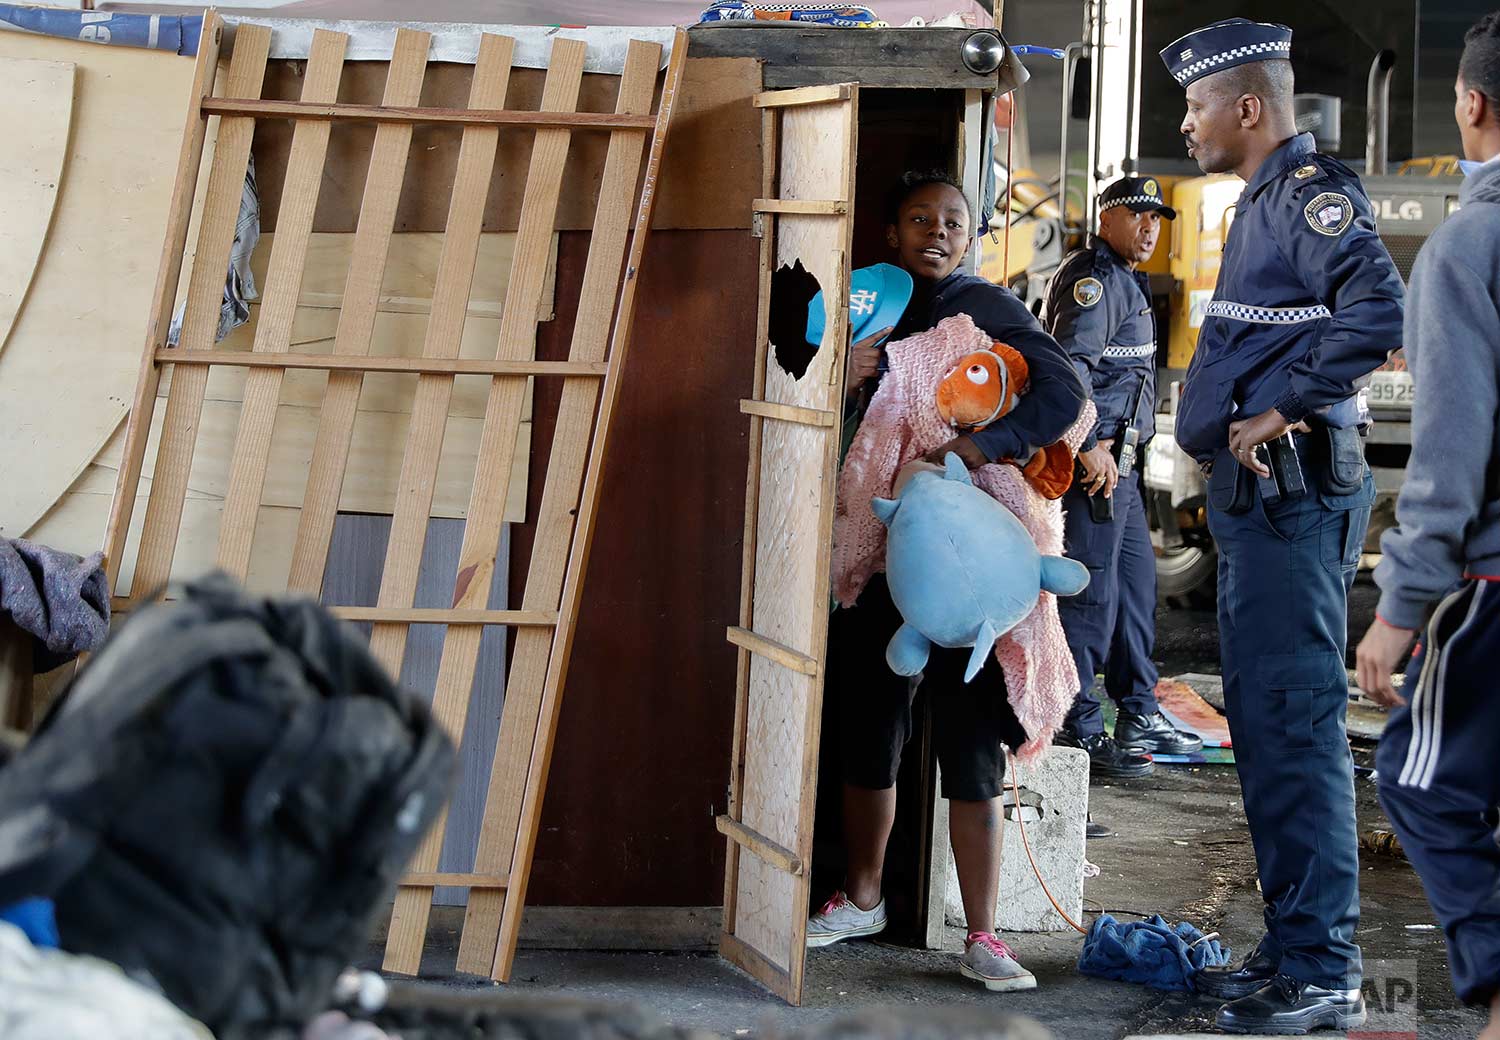 A police officer stands by as a woman carries her belongings during an eviction of people living in shacks beneath an overpass, in Sao Paulo, Brazil, Saturday, July 29, 2017. (AP Photo/Andre Penner)